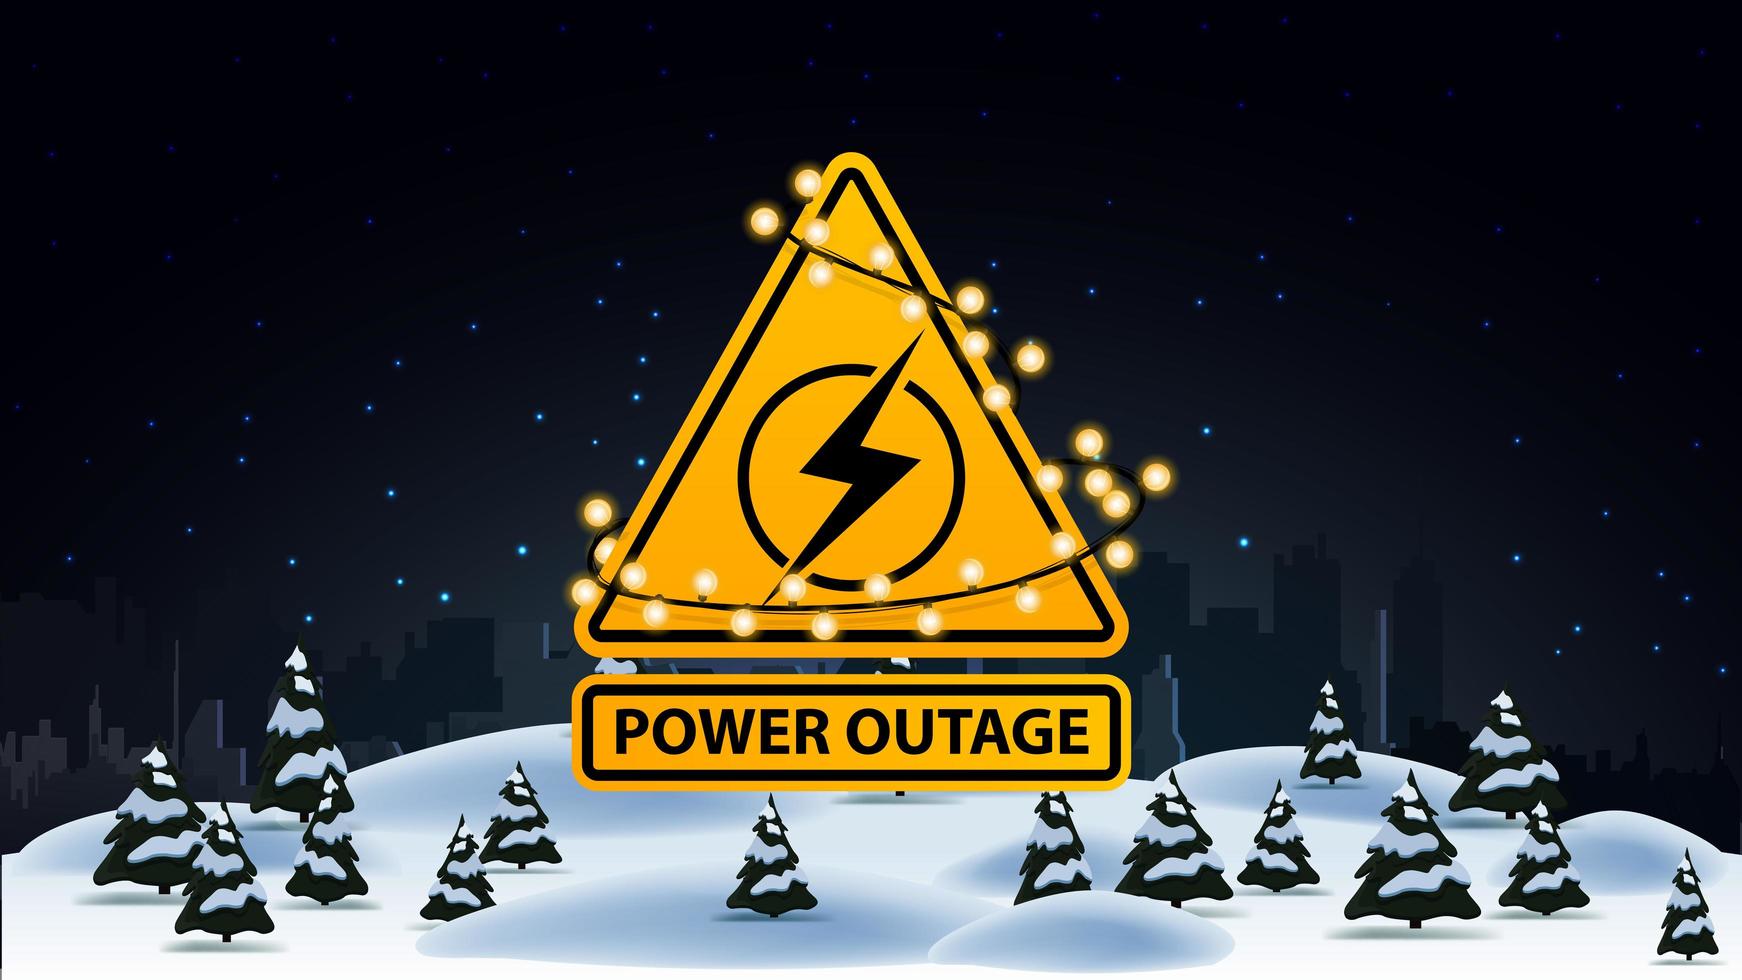 Power outage, yellow warning logo wrapped with a garland on the background of the city without electricity and winter landscape vector